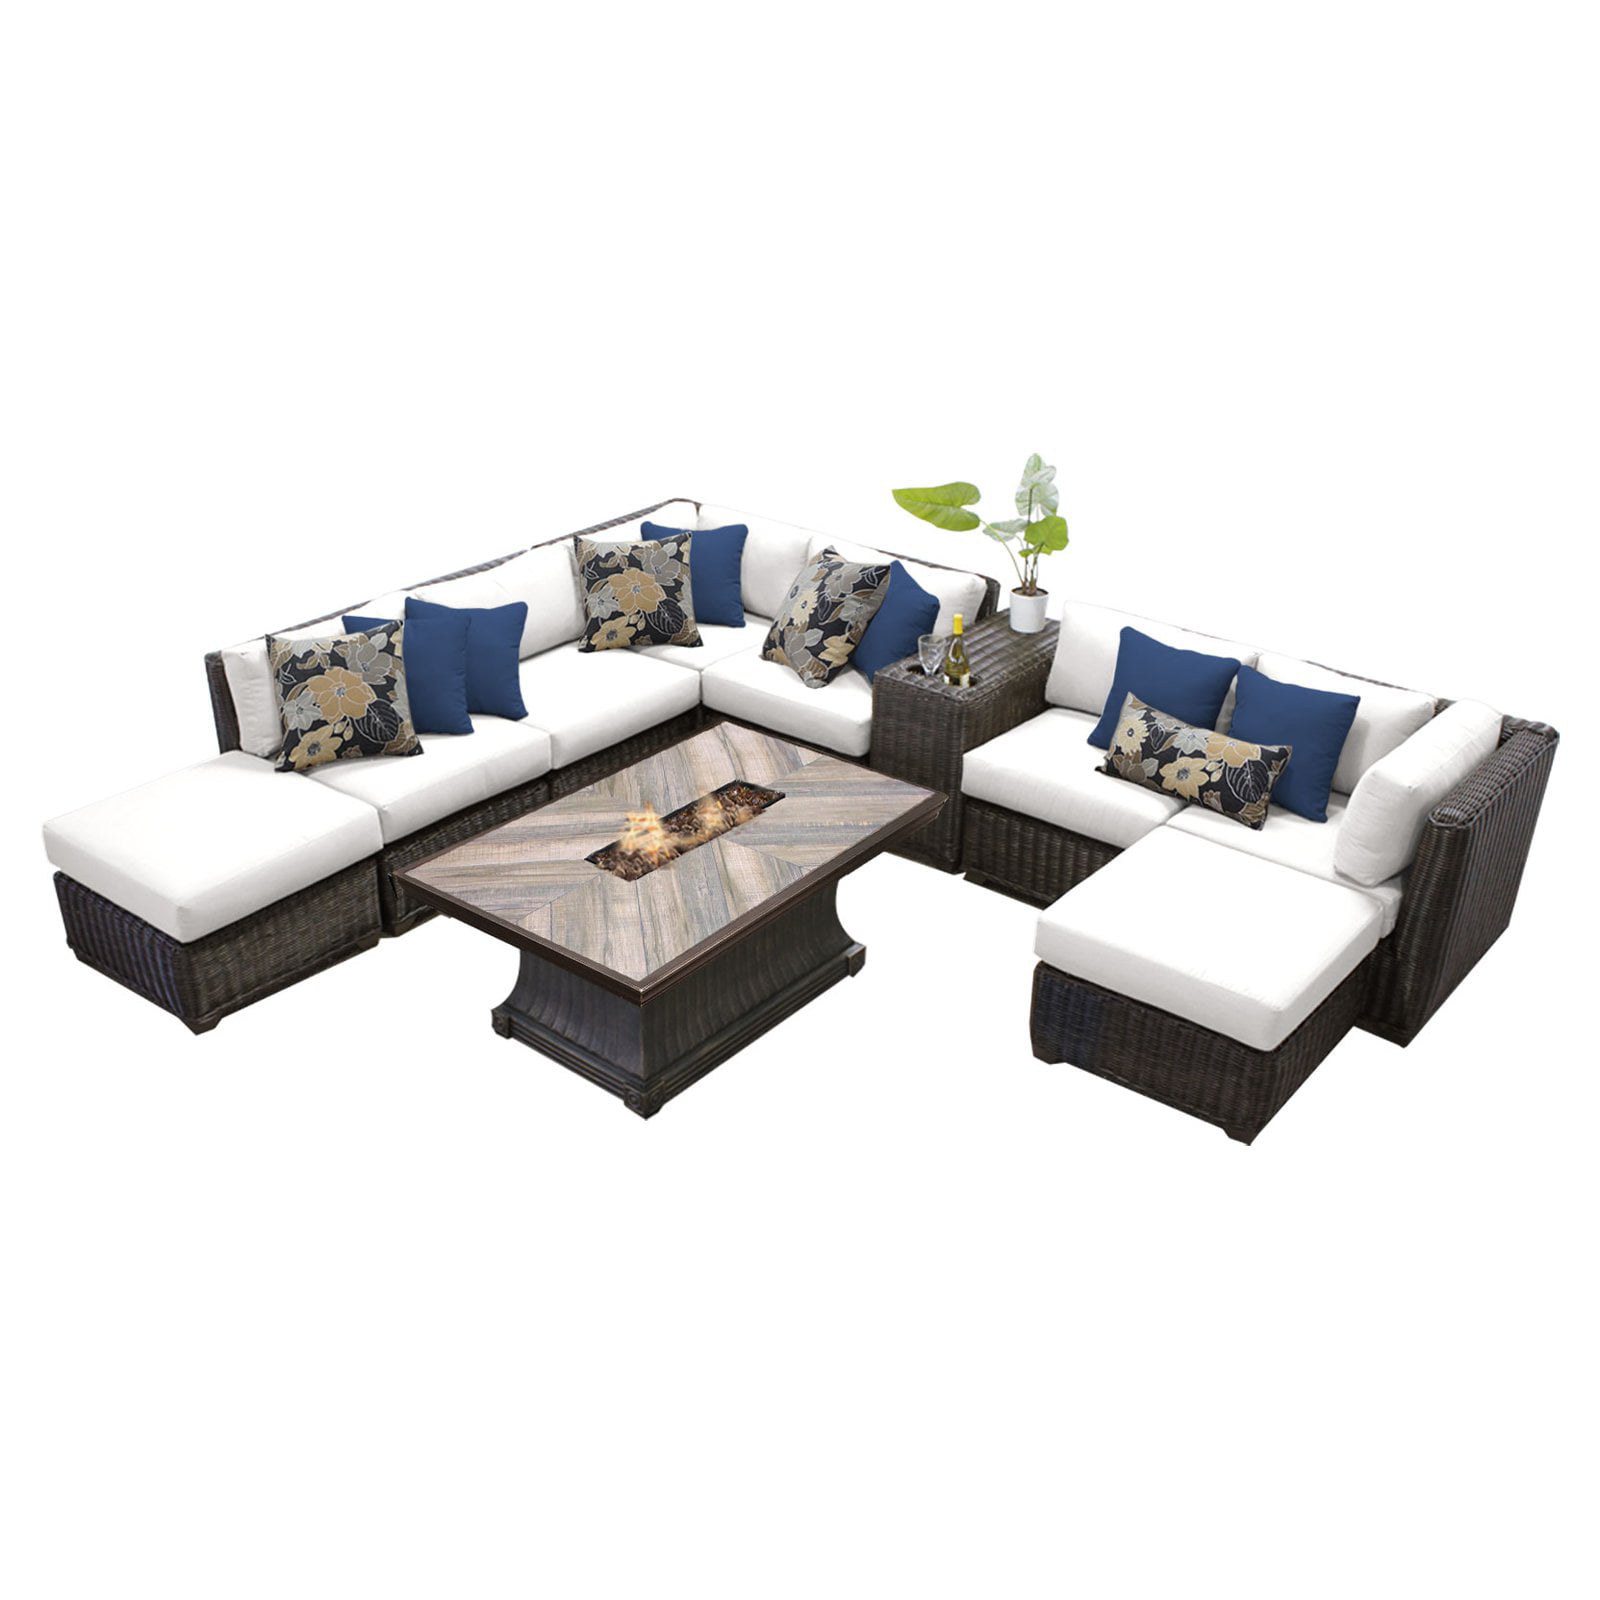 Tk Classics Venice 10 Piece Outdoor, Outdoor Sectional Furniture With Fire Pit